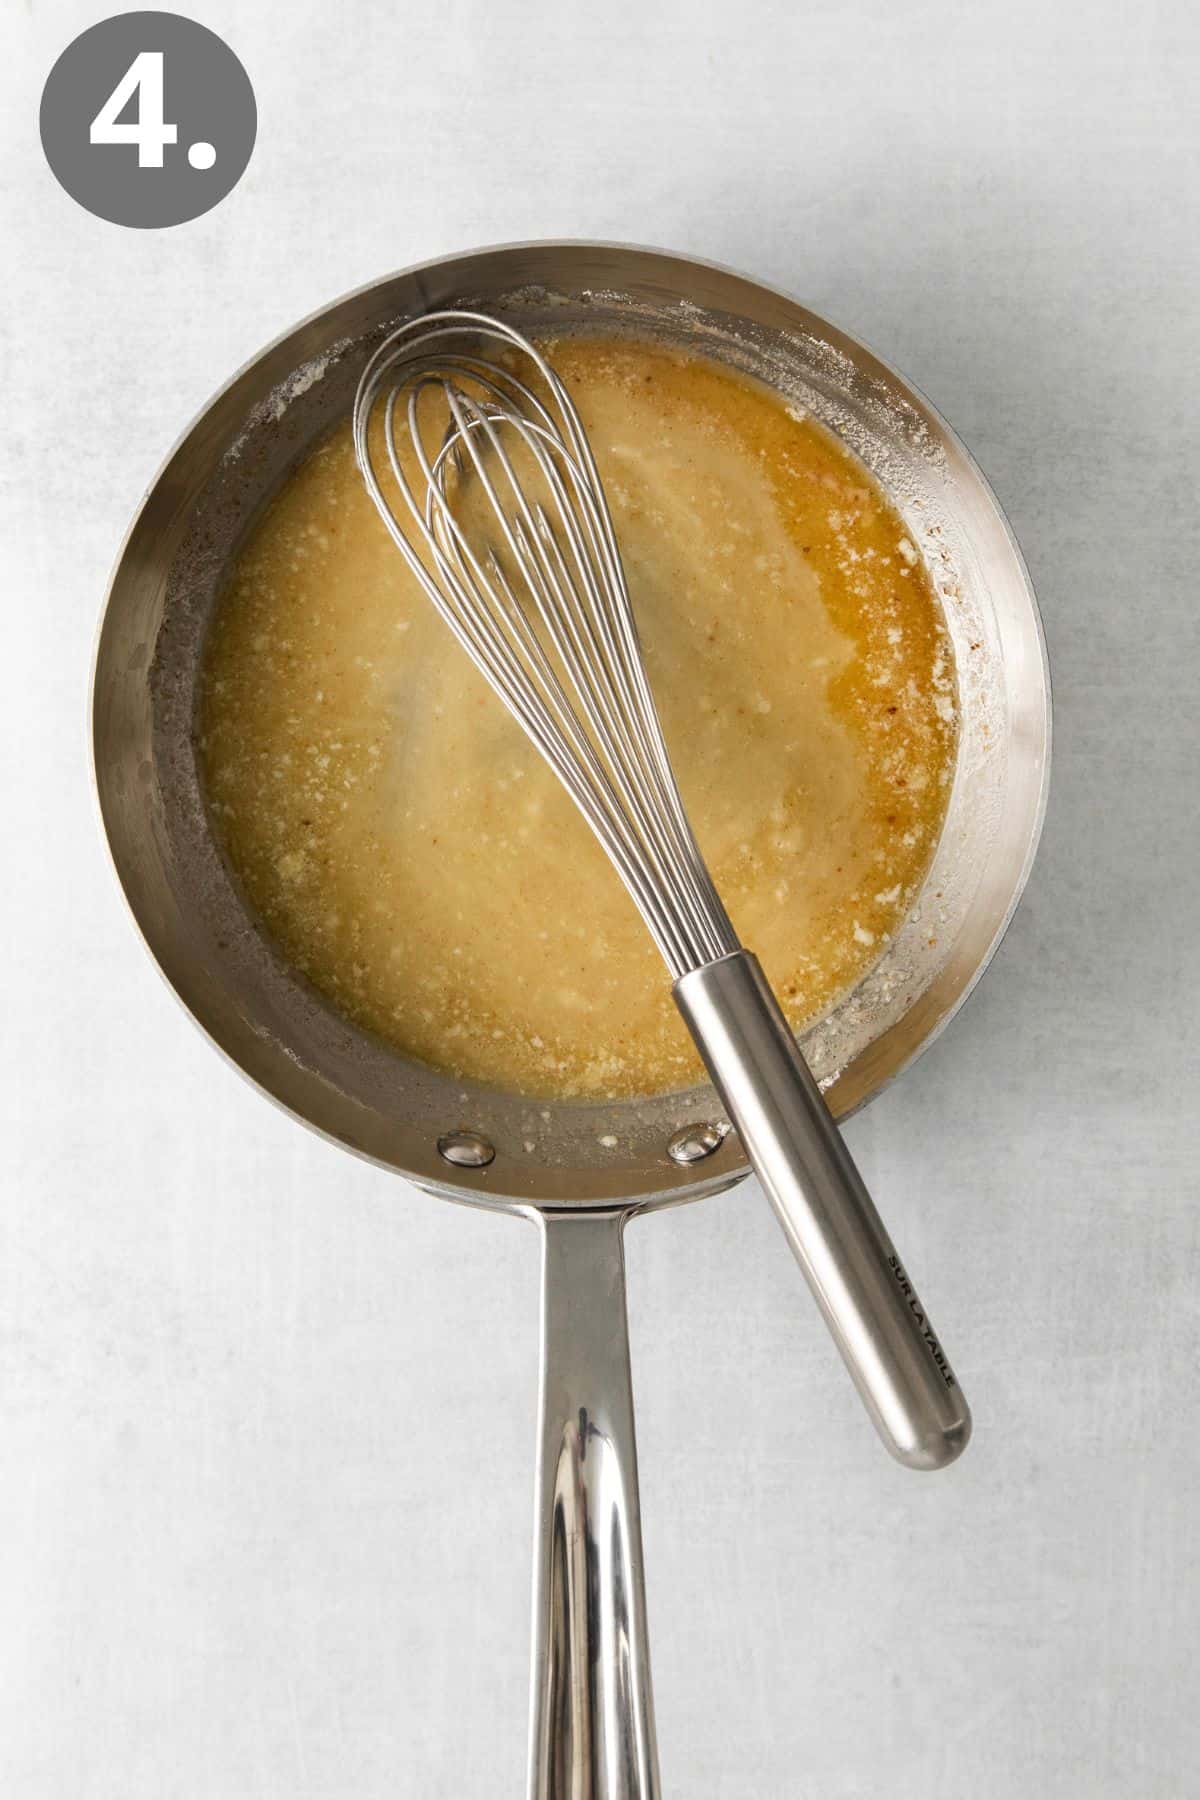 Melted butter and flour in a saucepan